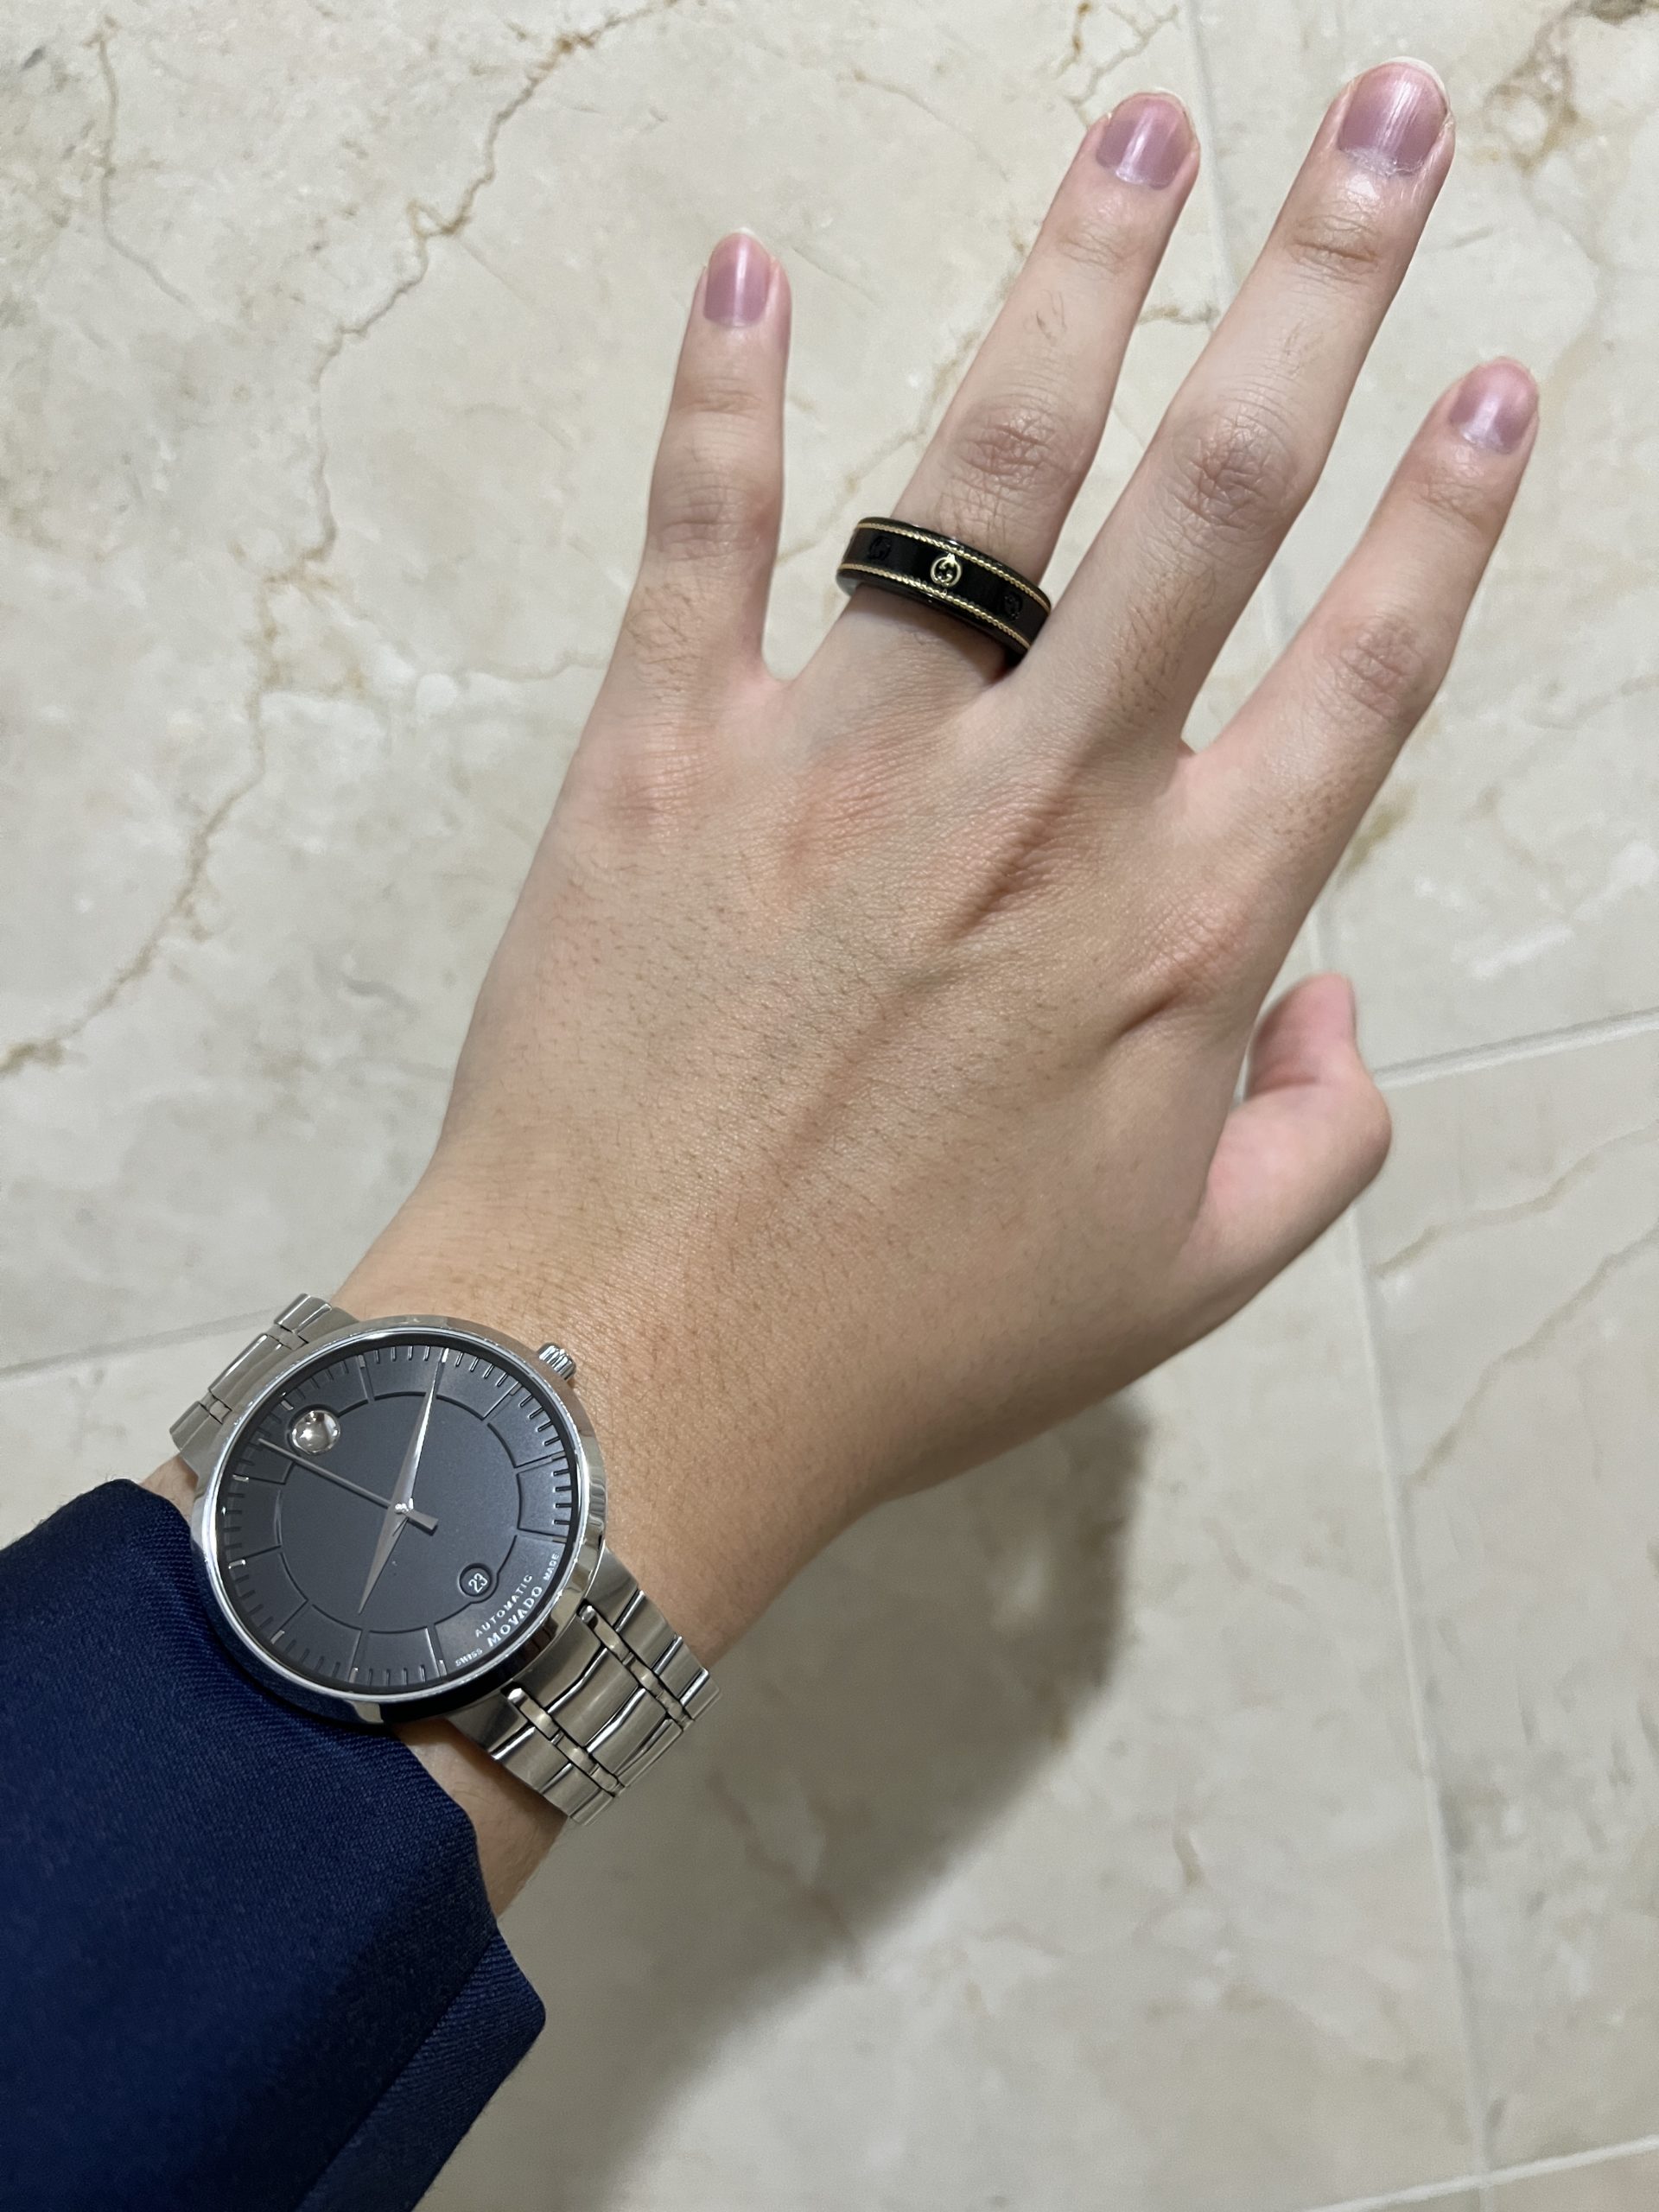 Gucci Just Restocked Its Limited-Edition Oura Ring